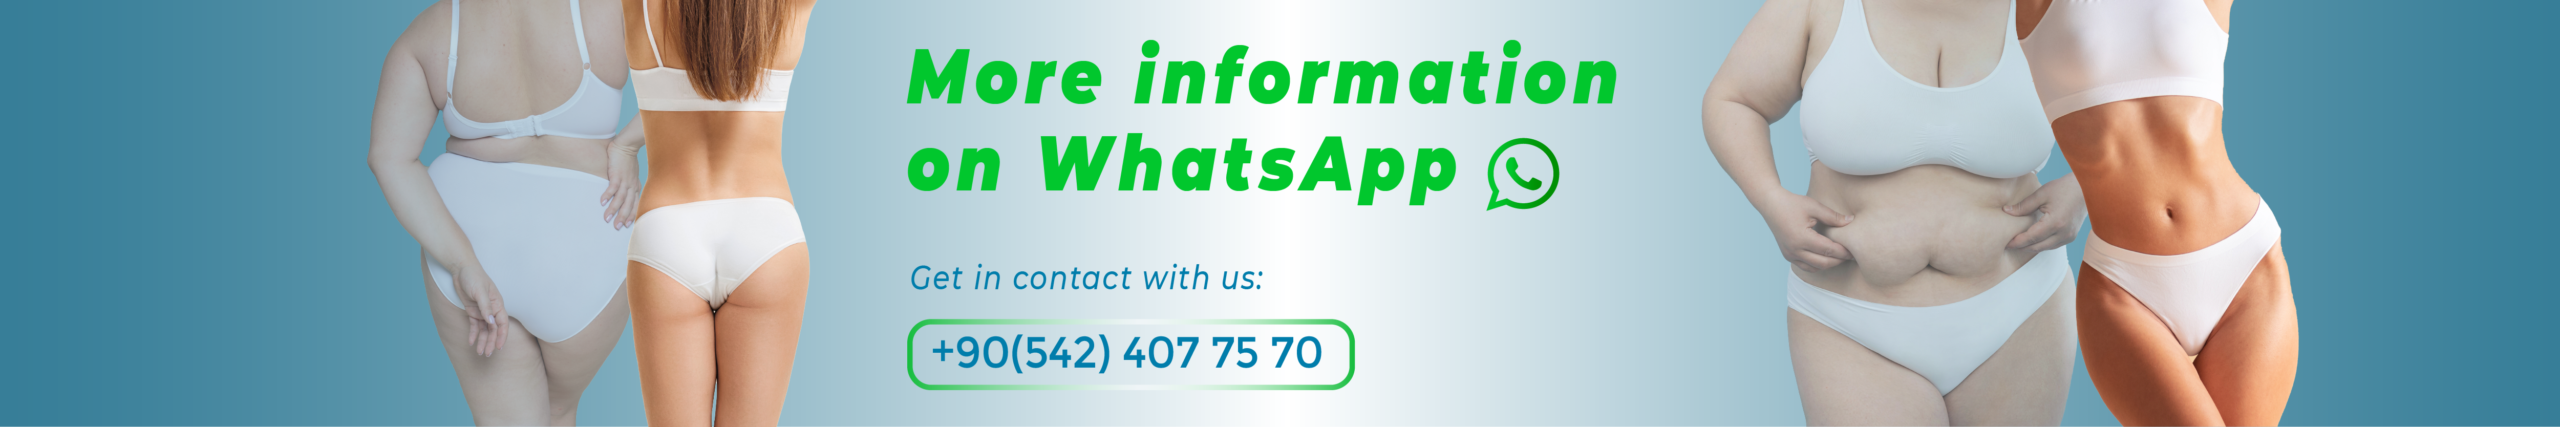 More information on whatsapp